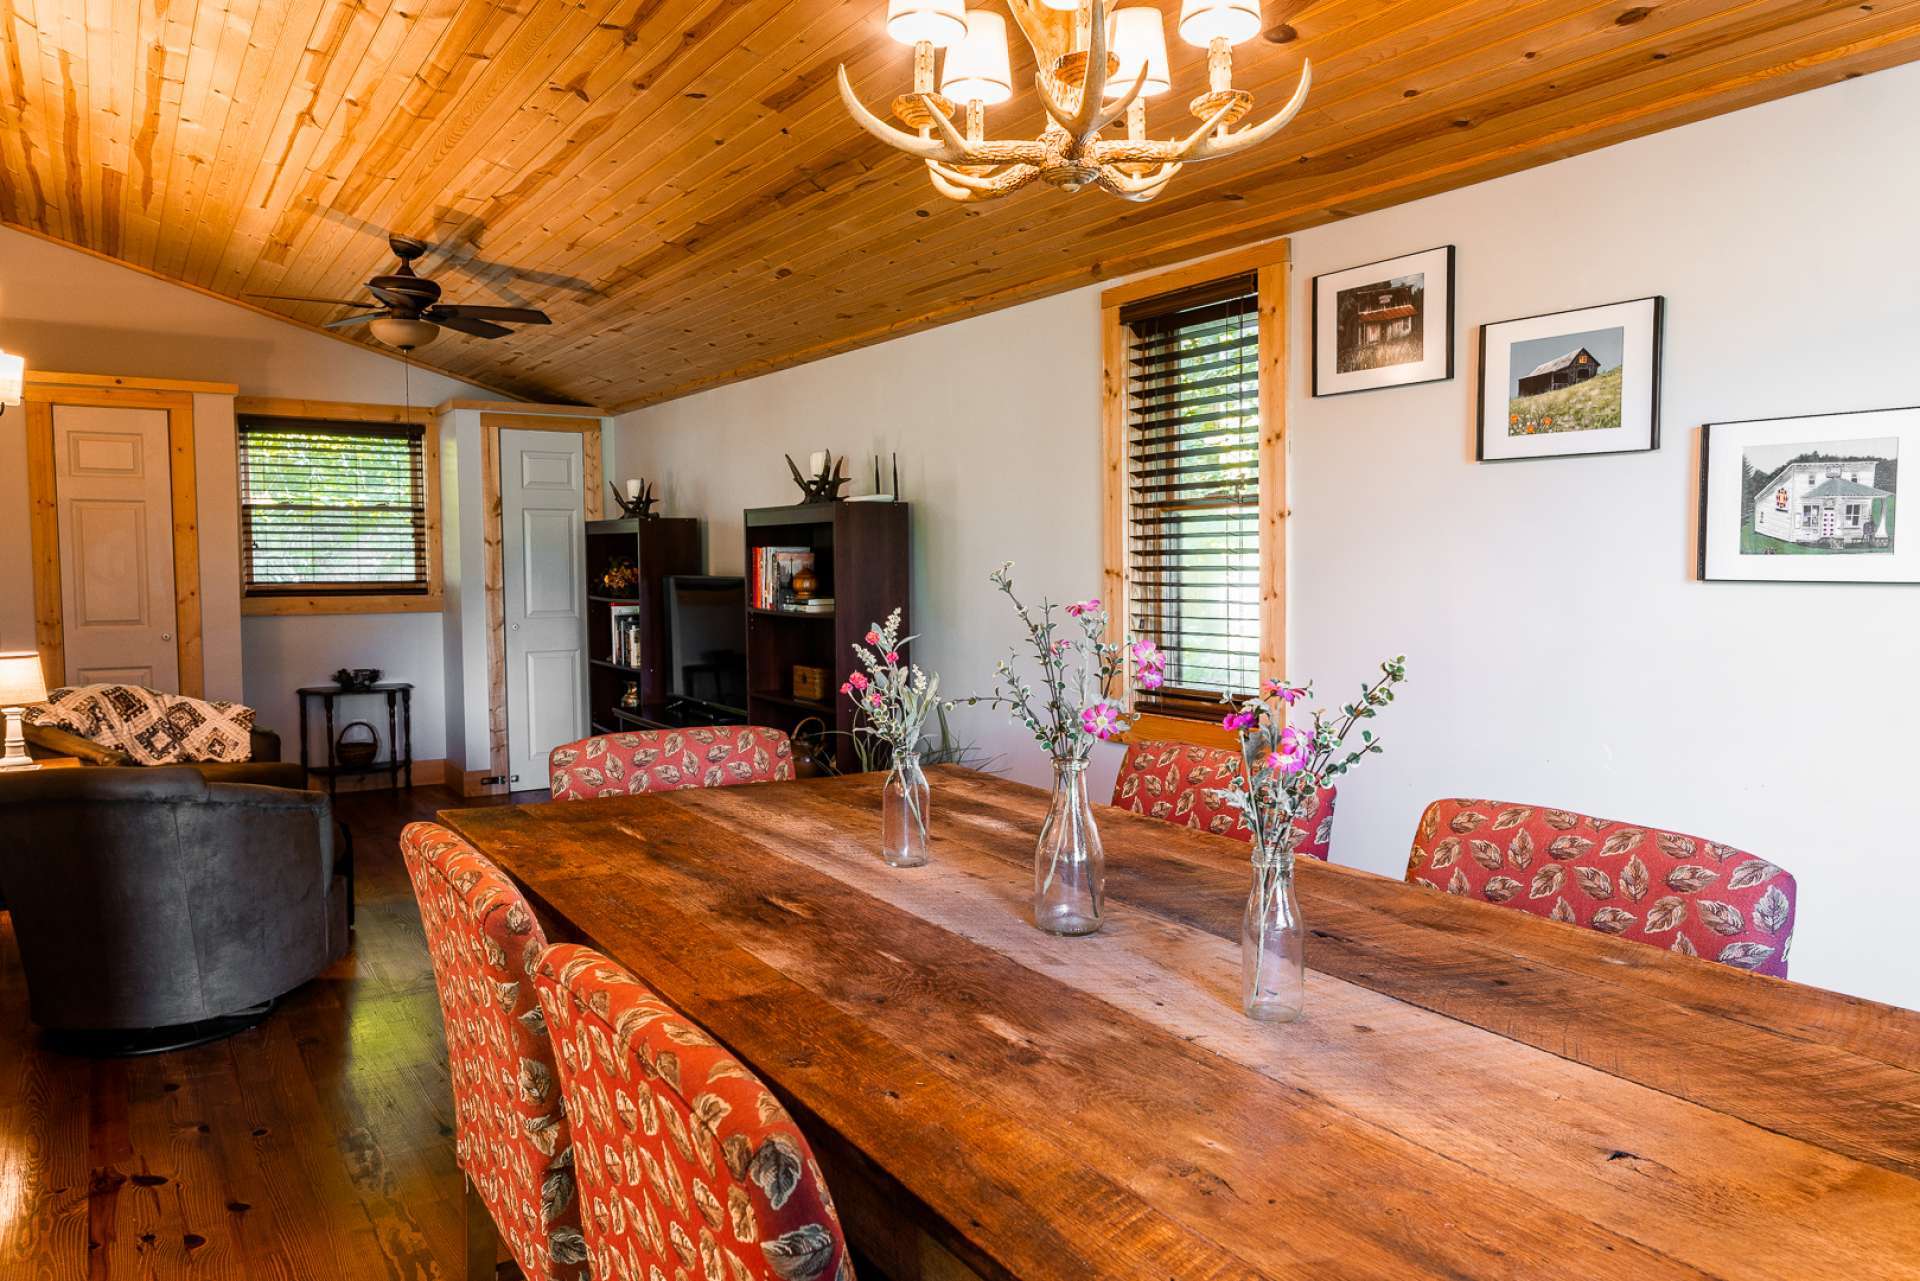 The dining area provides lots of space for entertaining.   This cottage is offered furnished. Notice the stunning dining table, handcrafted by a local artist.  At the end of the dining area is a space currently utilized as a den area with seating and TV.